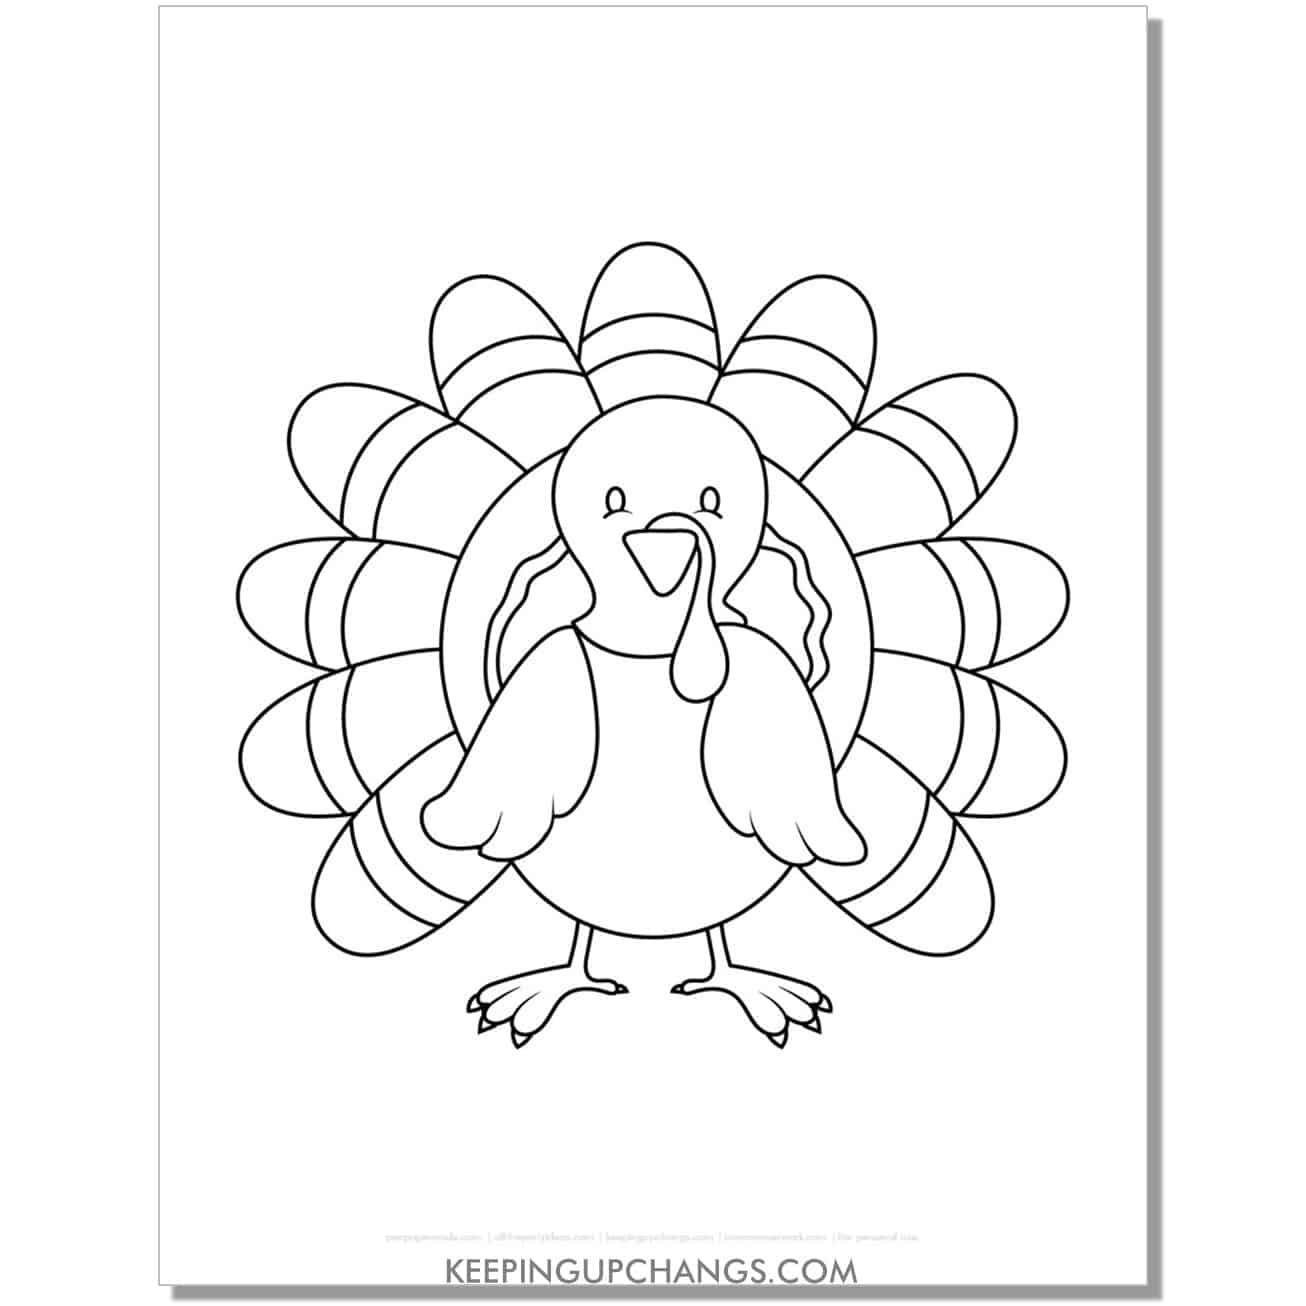 blank turkey template for school coloring page.